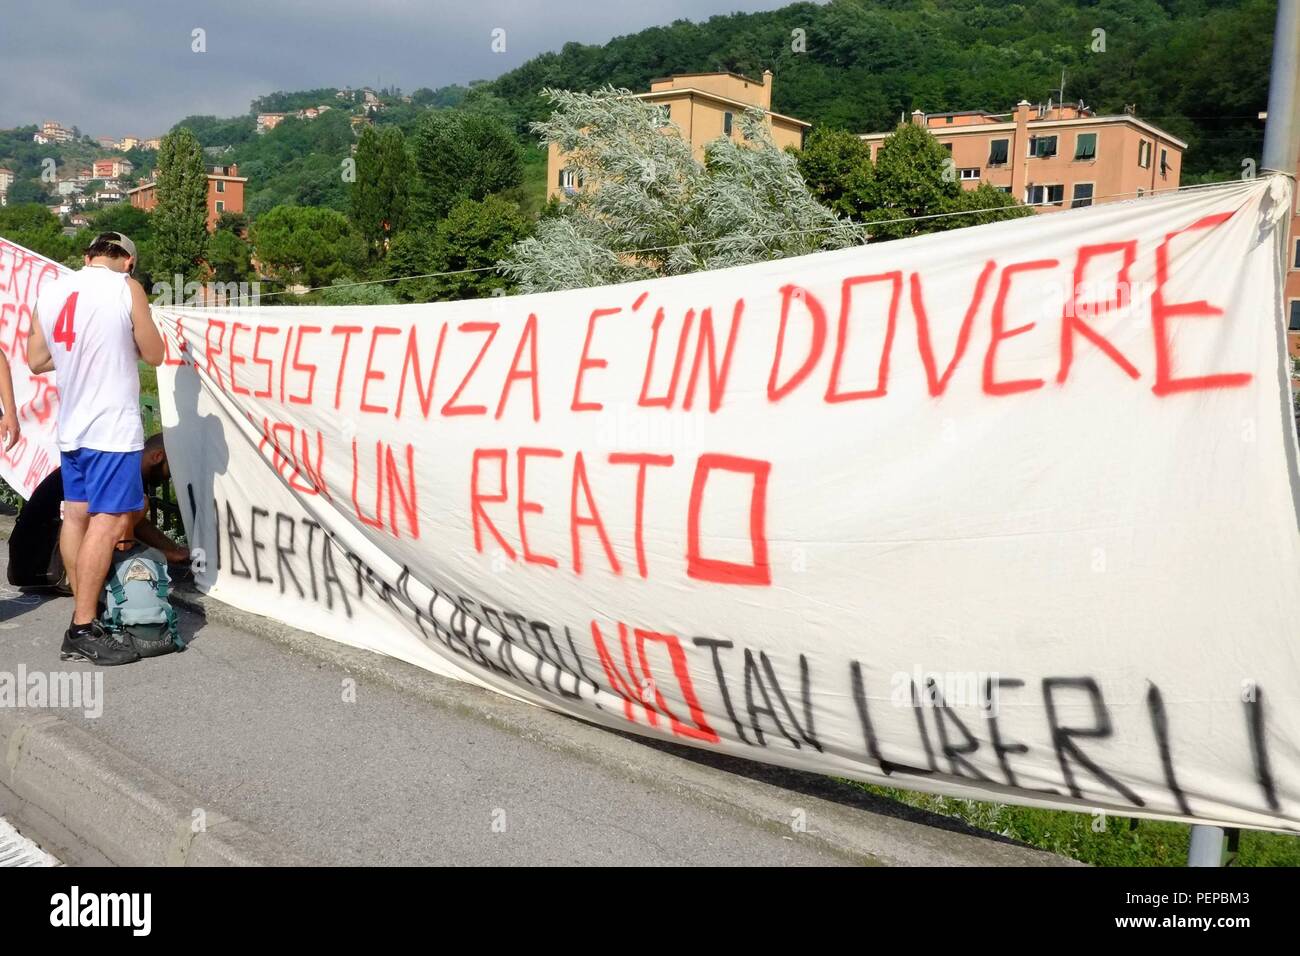 Genoa, Italy. 17th Aug, 2018. BANNER NO TAV NO GUTTER AGAINST THE REALIZATION OF THE THIRD VALLEY IN GENOA (news genova AR/FP, GENOVA - 2013-07-25) ps the photo can be used in respect of the context in which it was taken, and without the defamatory intent of the decorum of the represented people (news genova AR/FP, Foto Repertorio - 2018-08-17) ps the photo can be used respecting the context in which it was taken, and without the defamatory intent of the decoration of the people represented. Credit: Independent Photo Agency Srl/Alamy Live News Stock Photo